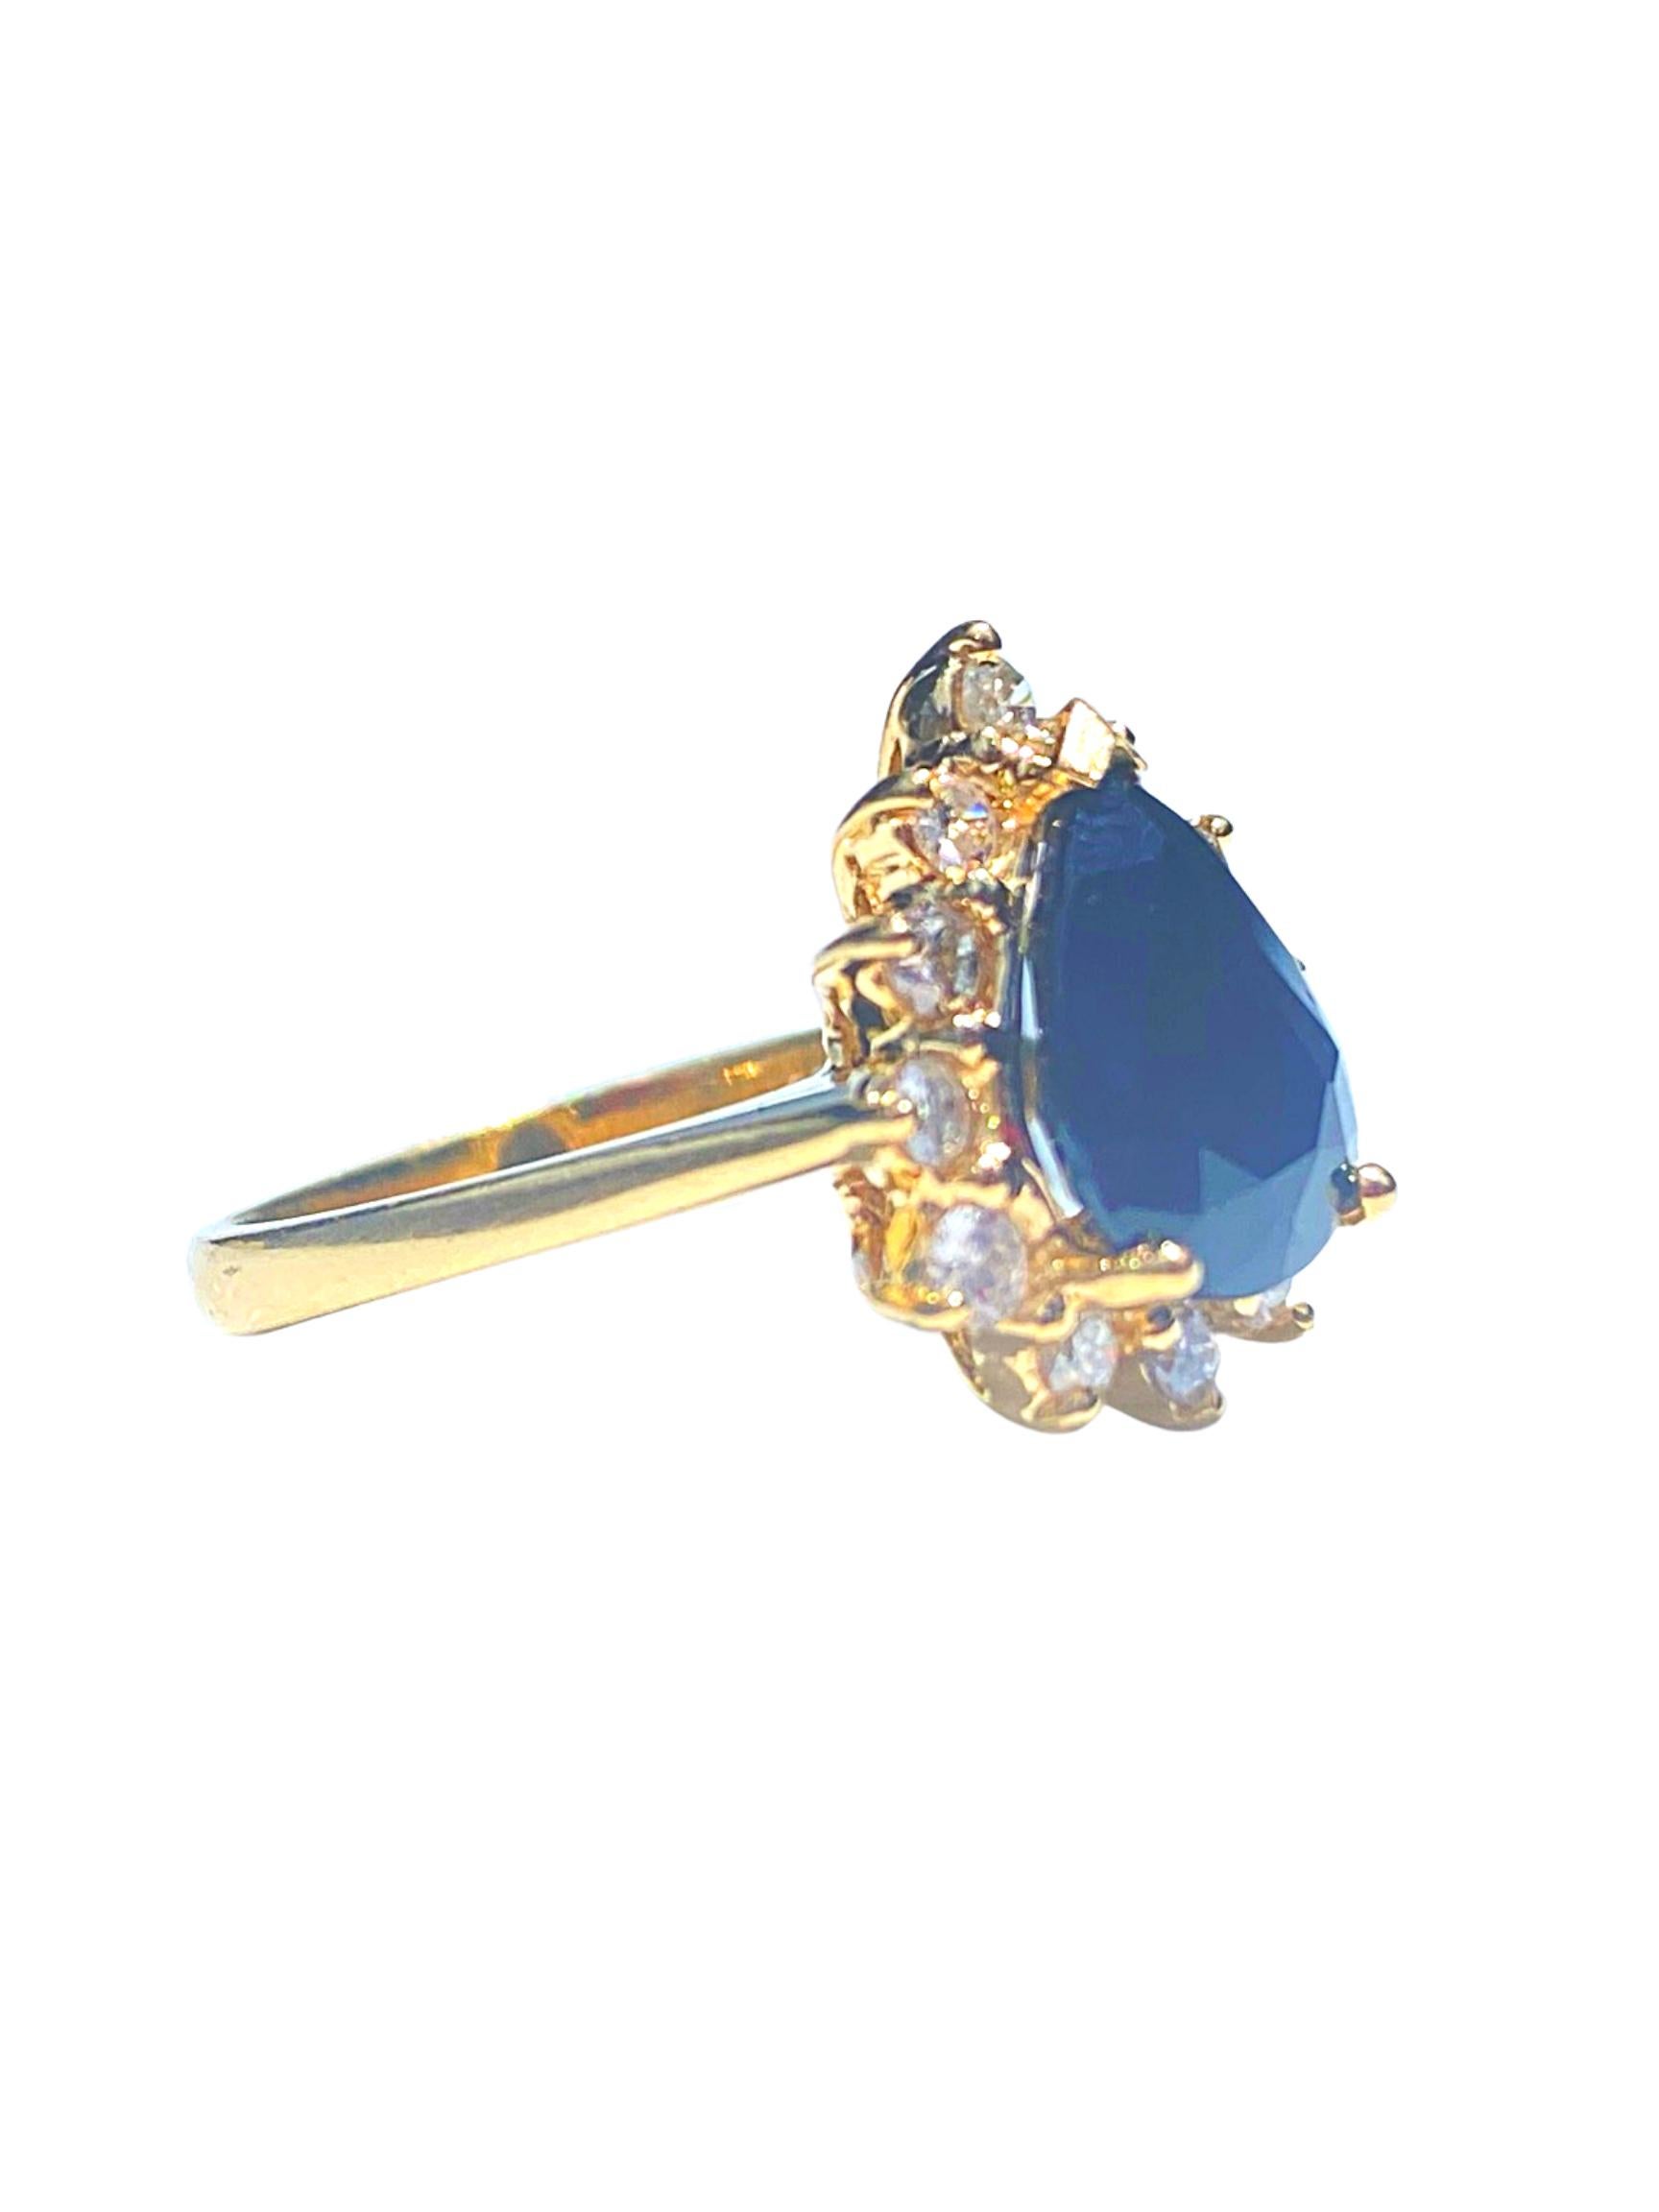 Centering an approximately ~3.00 Carat Pear-Shape Blue Diamond, framed by an additional 12 Round-Brilliant Cut Diamonds, and set in 14K Yellow Gold. 

Details:
✔ Stone: Blue Sapphire
✔ Center-Stone Weight: ~3.00 Carats
✔ Stone Cut: Pear
✔ Stone